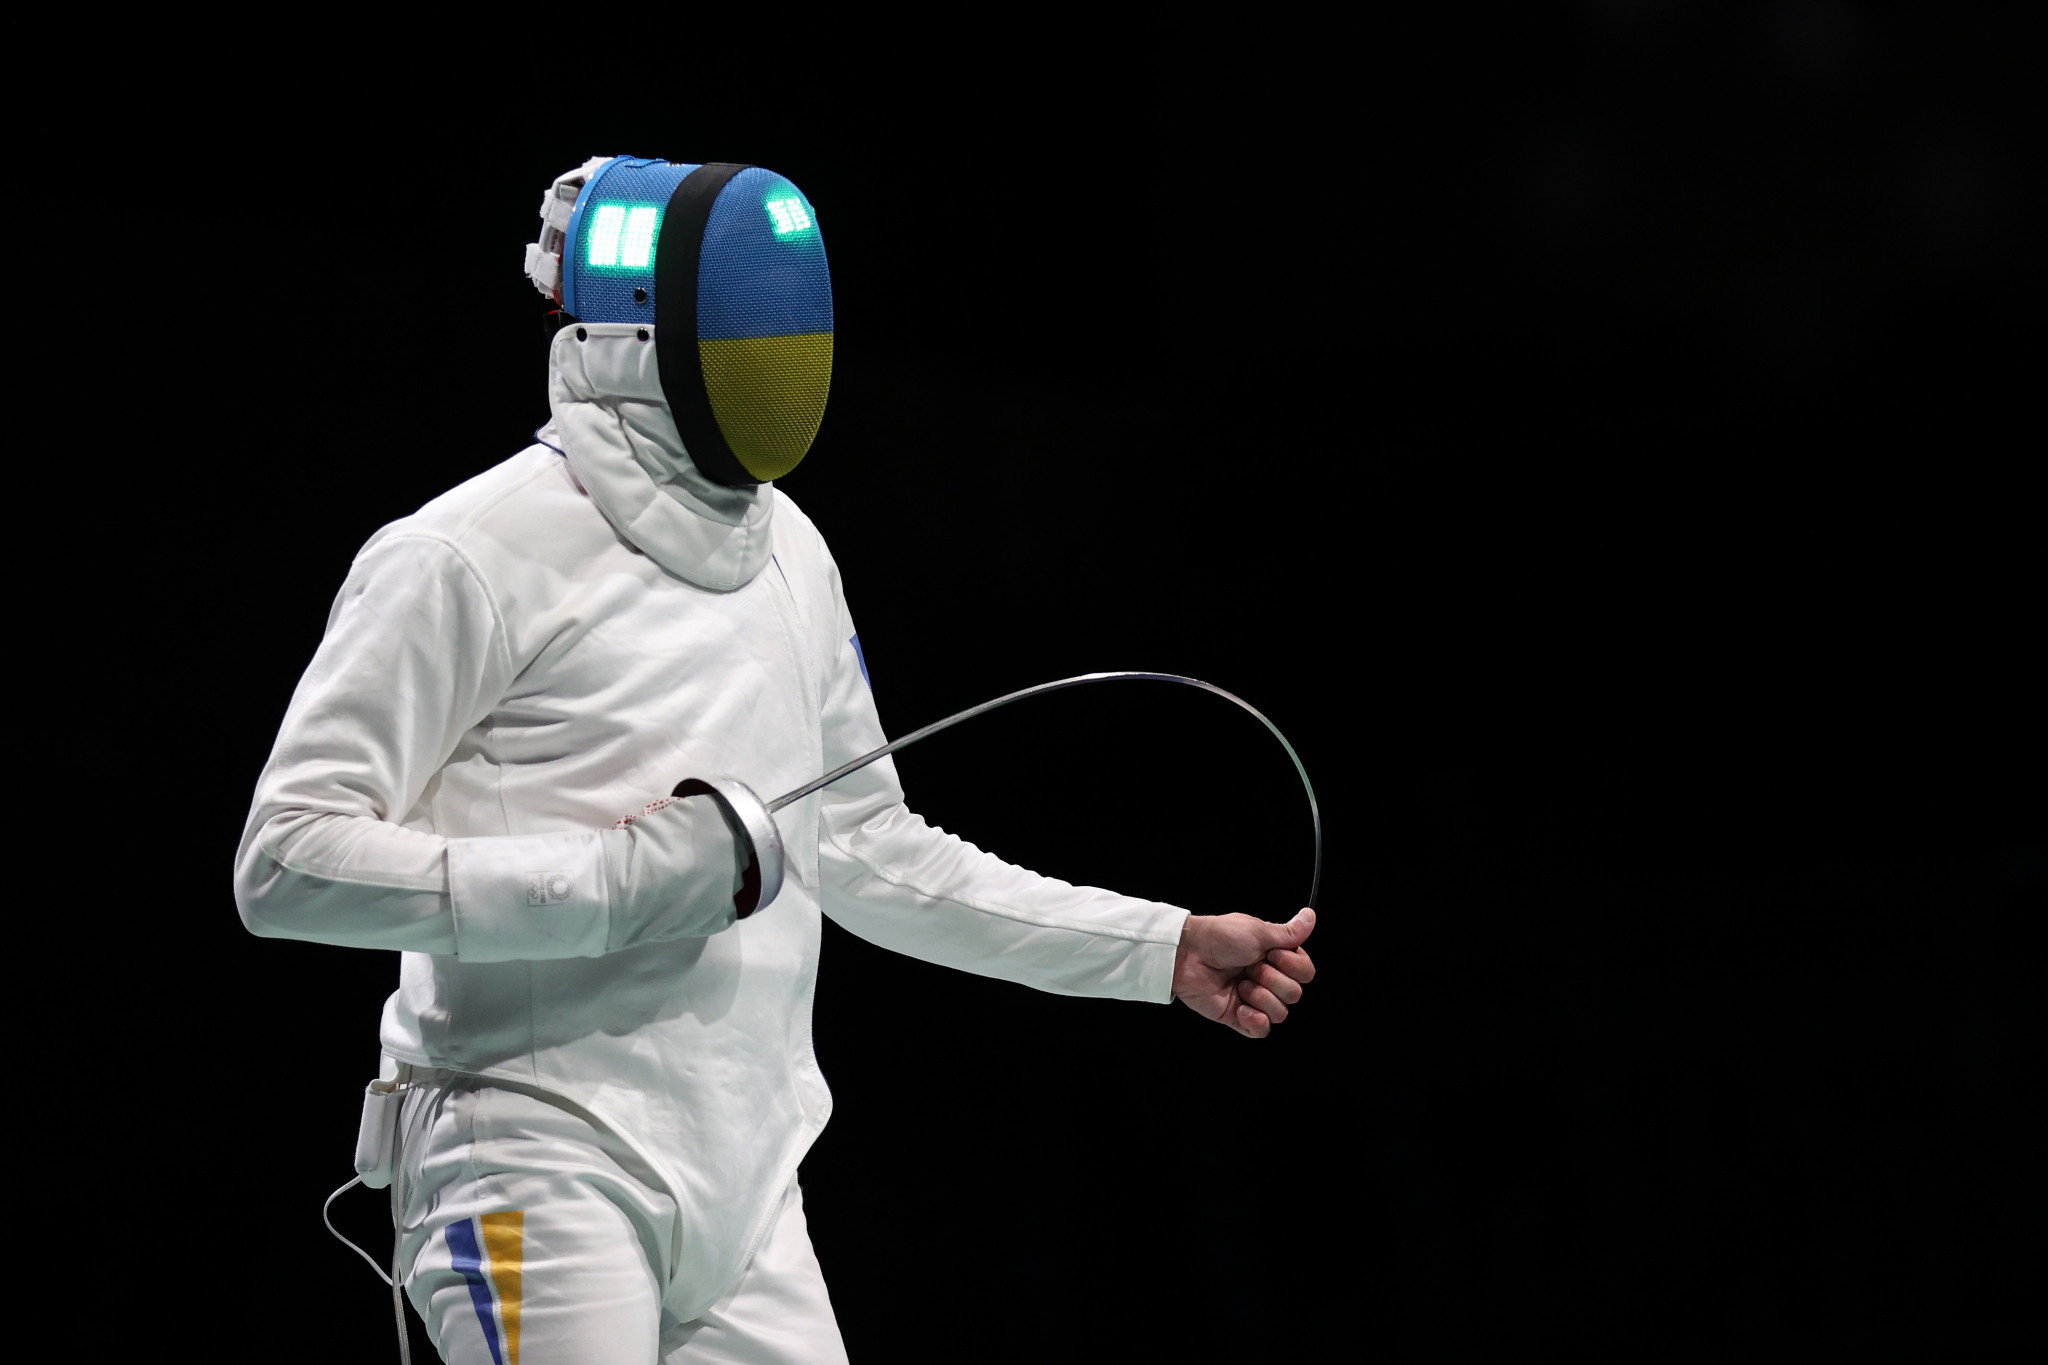 The Ukrainian Fencing Federation is looking to take legal action against the FIE over the decision to readmit Russian and Belarusian athletes ©Getty Images